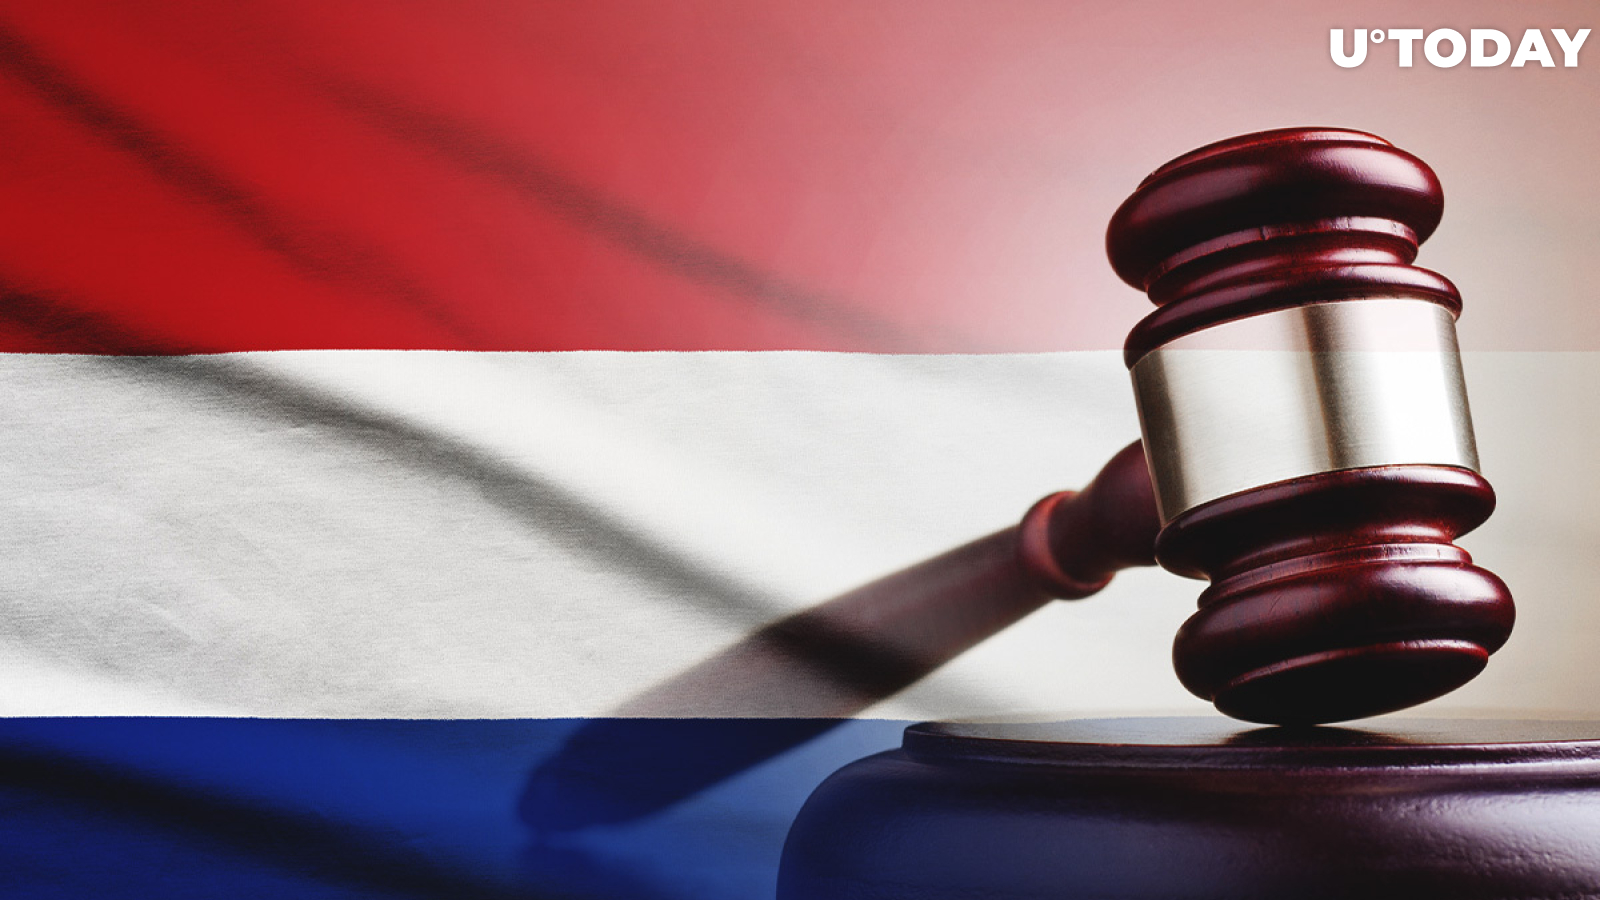 Dutch Central Bank Defeated by Bitcoin Exchange in Major Court Case